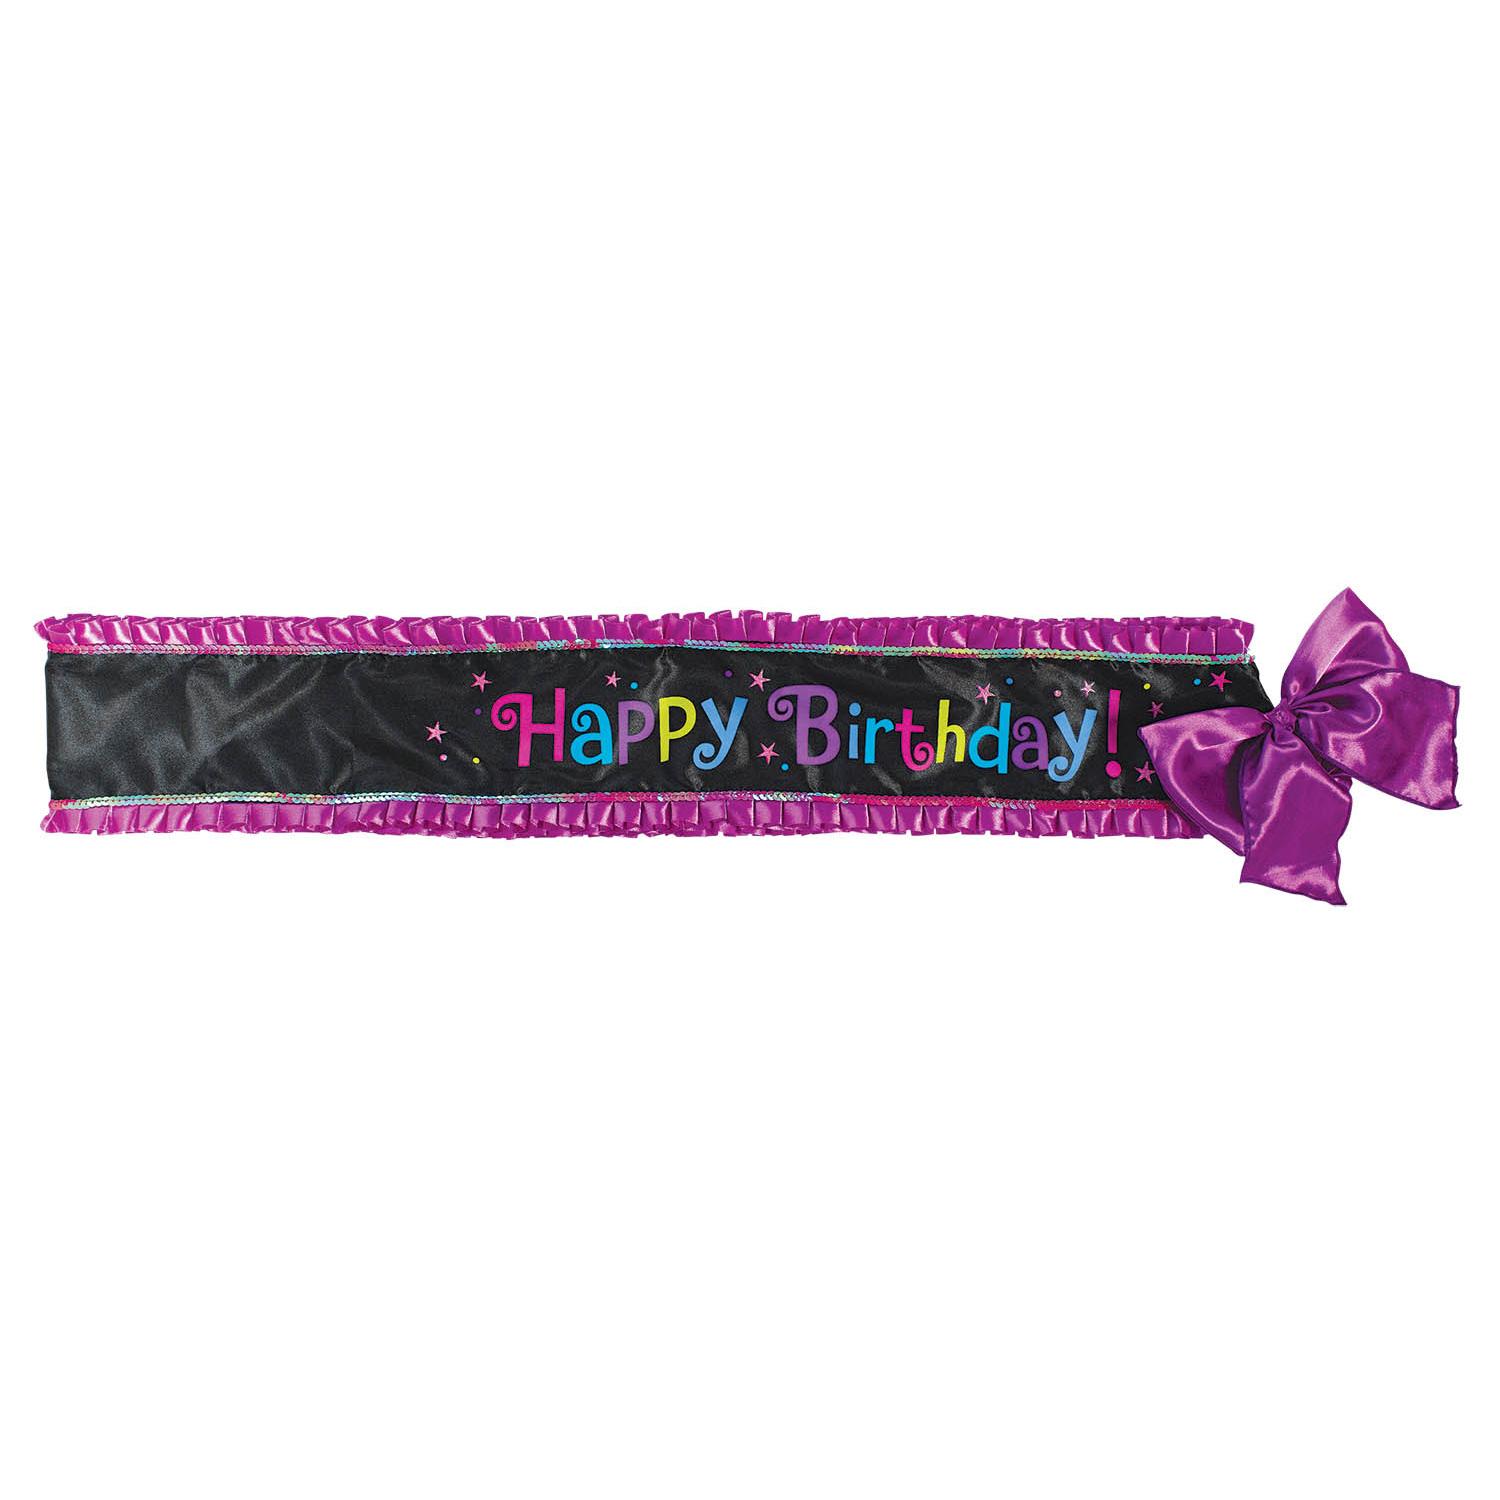 Birthday Chic Deluxe Fabric Sash Costumes & Apparel - Party Centre